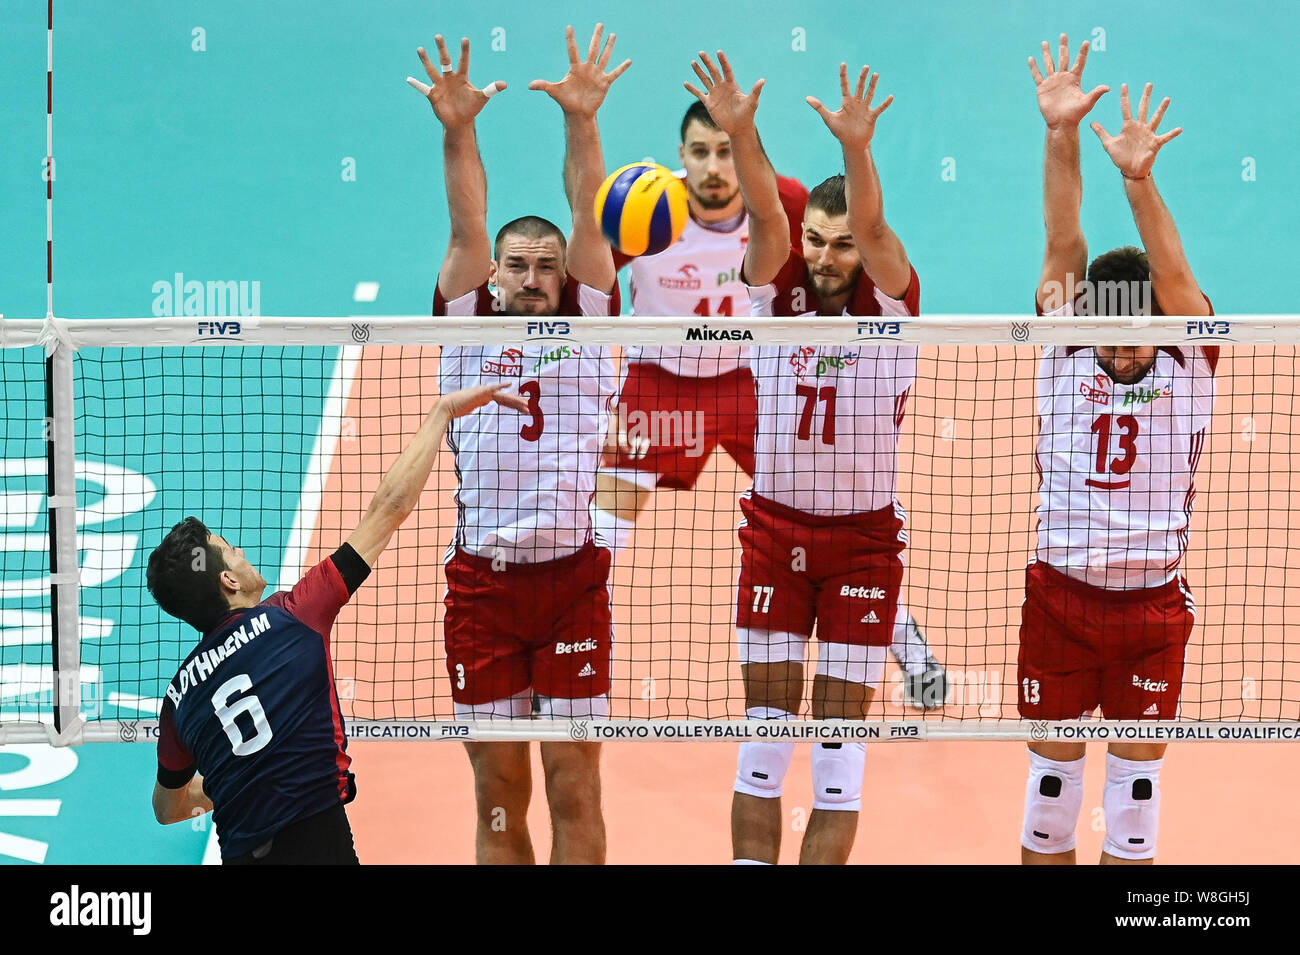 Dawid Konarski (L) Karol Klos (C) and Michal Kubiak (R) from Poland are seen in action during Men's Olympics Qualifiers Tournament Pool D match between Poland and Tunisia.(Poland beat Tunisia : 3-0) Stock Photo